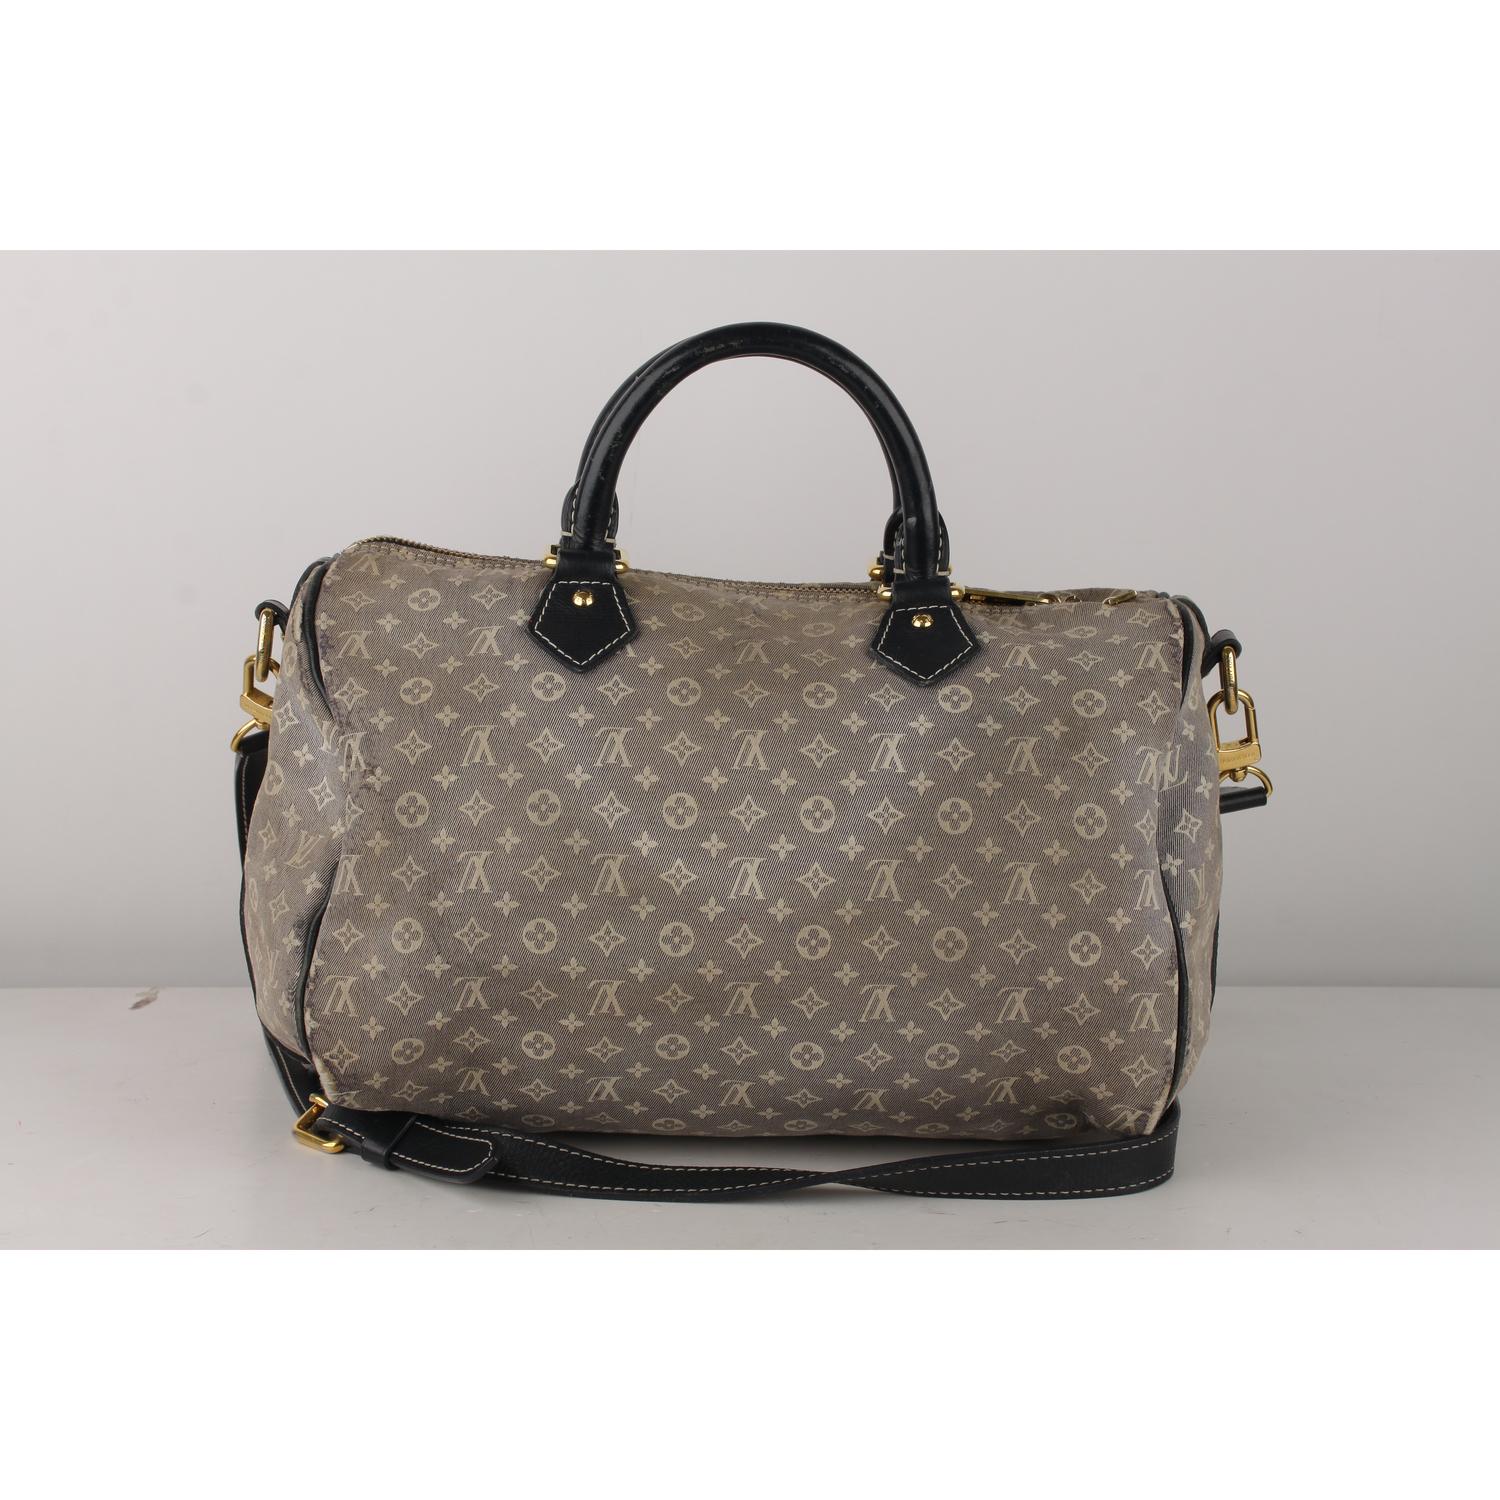 Louis Vuitton Monogram Idylle Encre Speedy 30 Bandouliere Bag

Material: Canvas
Color: Blue
Model: Speedy 30 Bandouliere
Gender: Women
Country of Manufacture: France
Size: Medium
Bag Depth: 7 inches - 17,8 cm 
Bag Height: 8 inches - 20,3 cm 
Bag